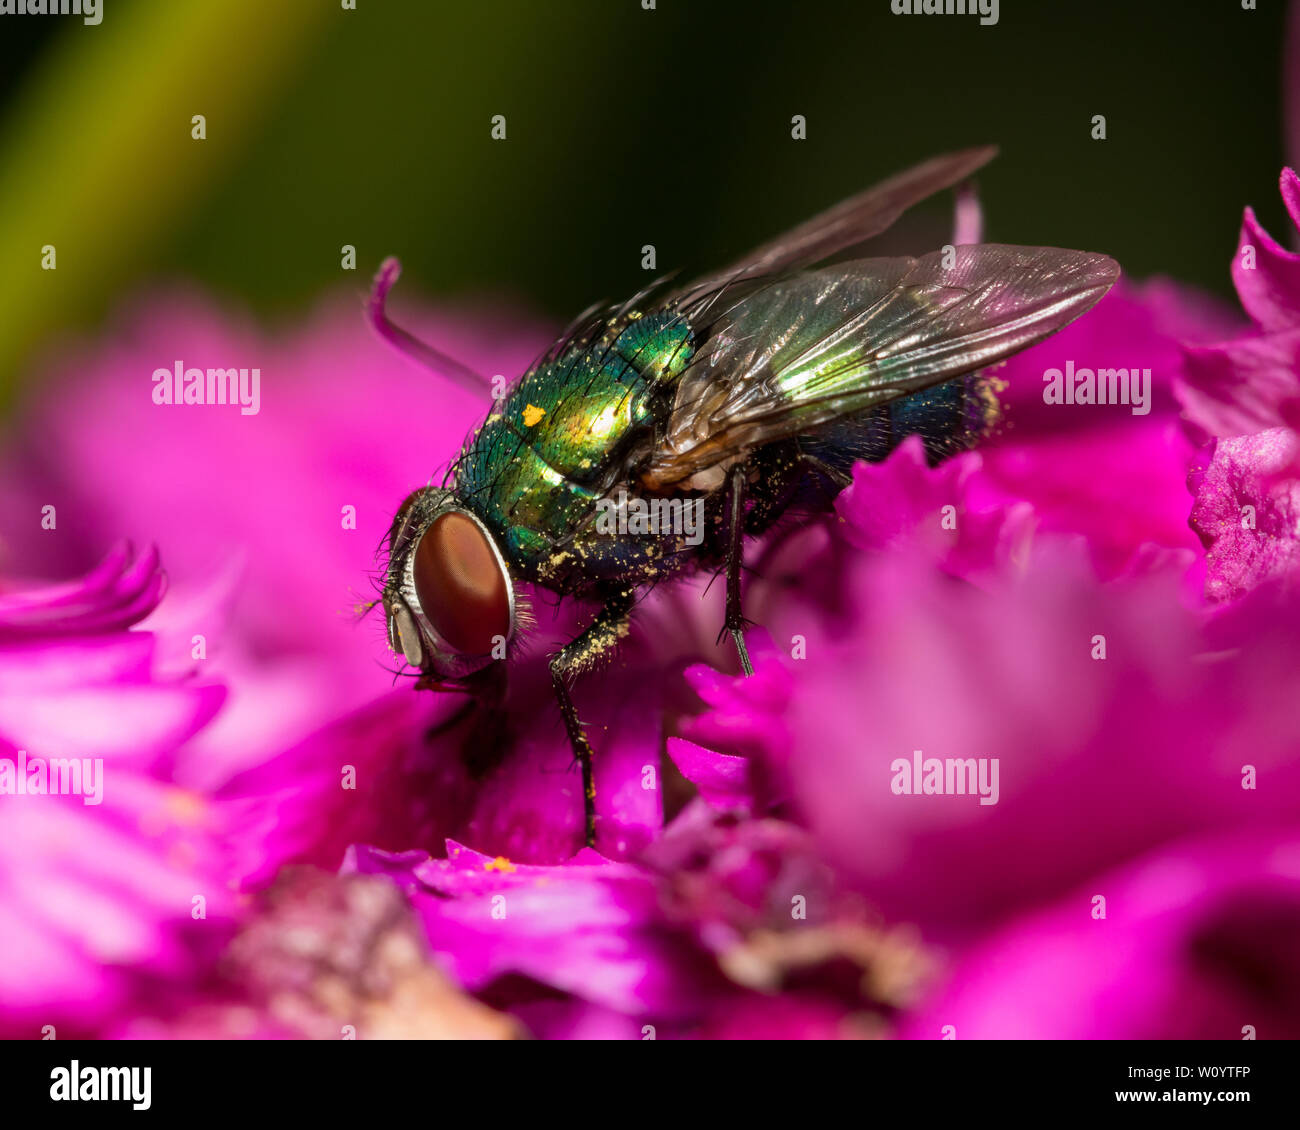 Green Bottle fly , Blow fly, sitting on a purple flower with detail of the compound eye and body Stock Photo